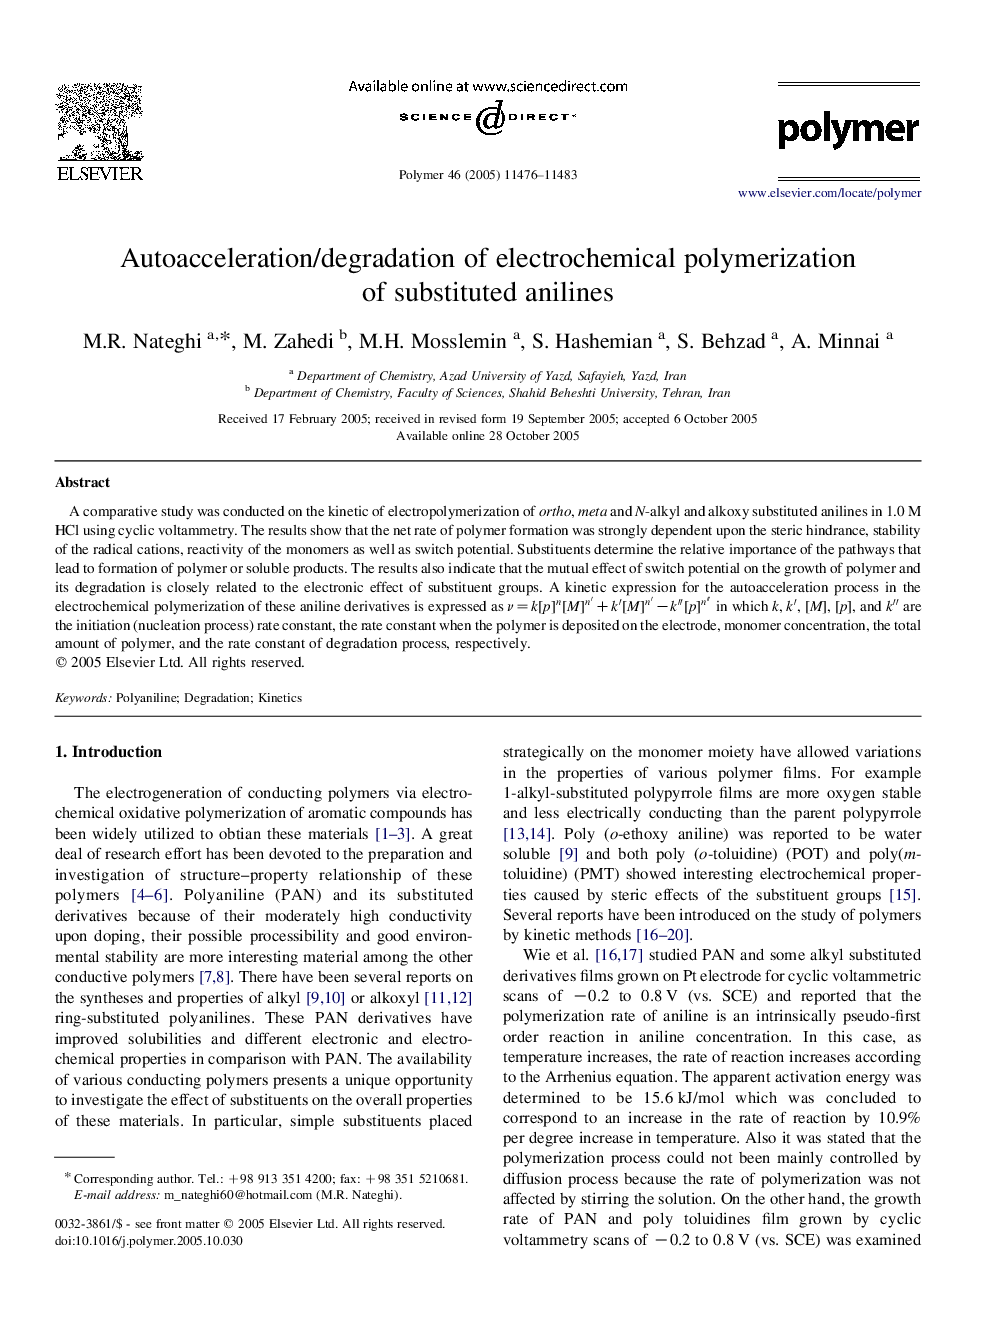 Autoacceleration/degradation of electrochemical polymerization of substituted anilines